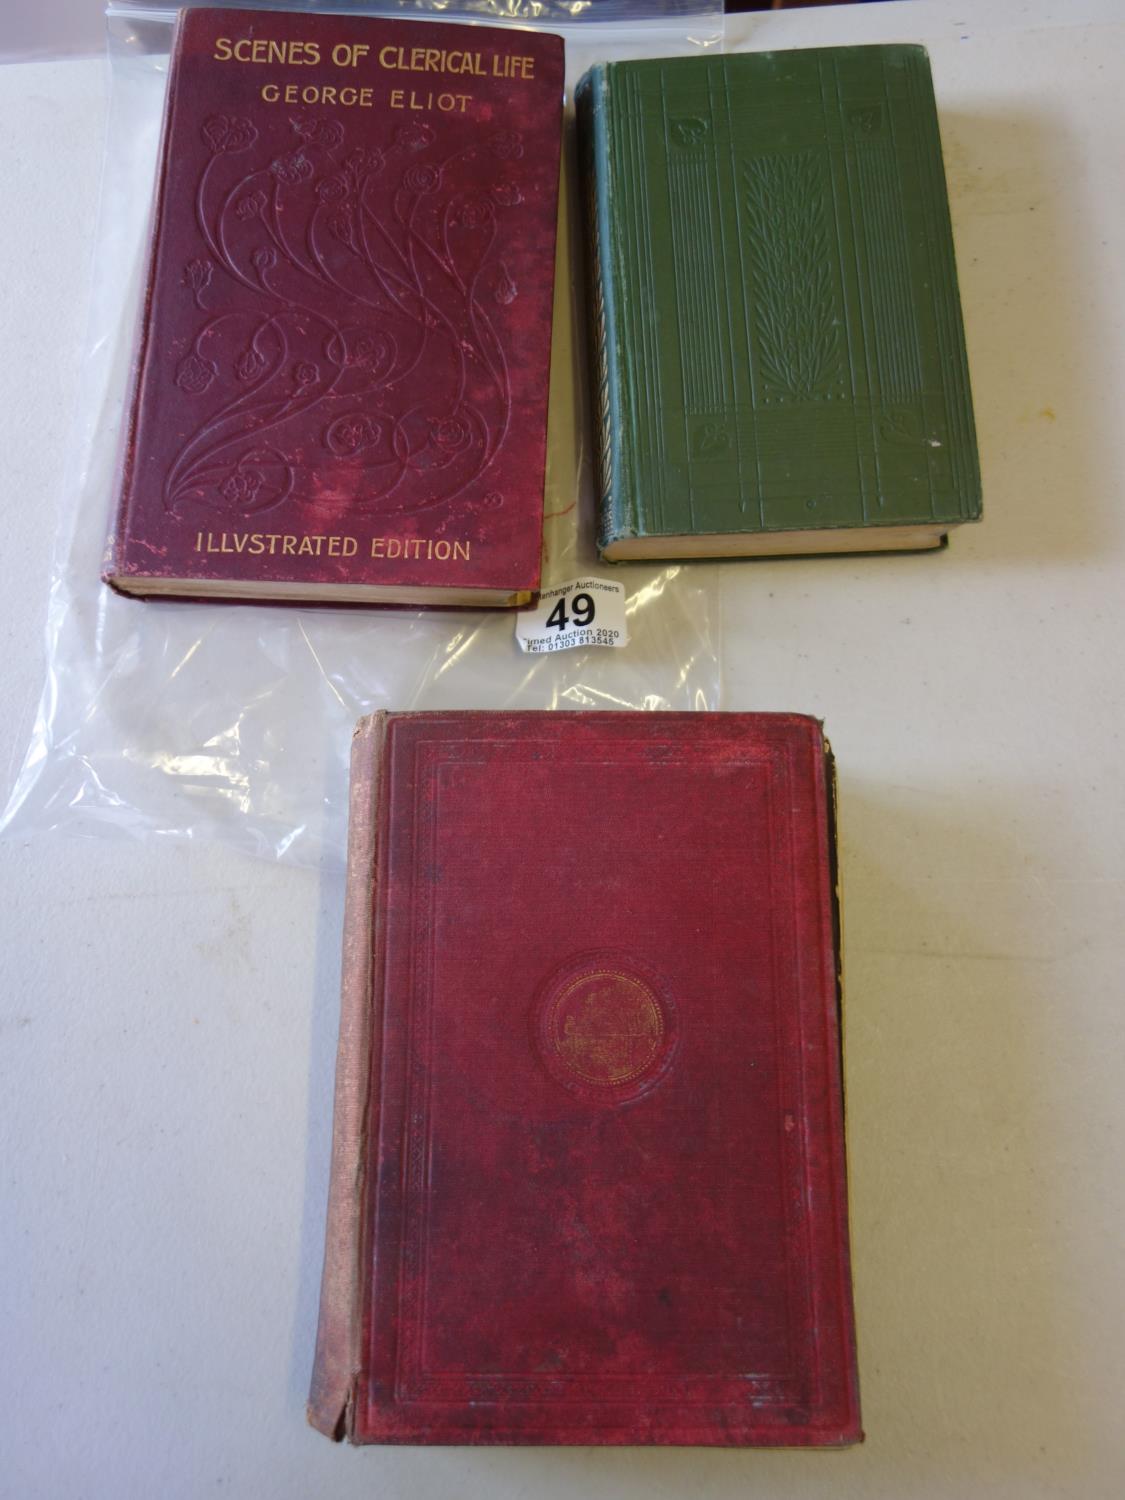 George Elliott, 1899 edition Scenes of Clerical Life, illustrated edition and a hard bound copy of